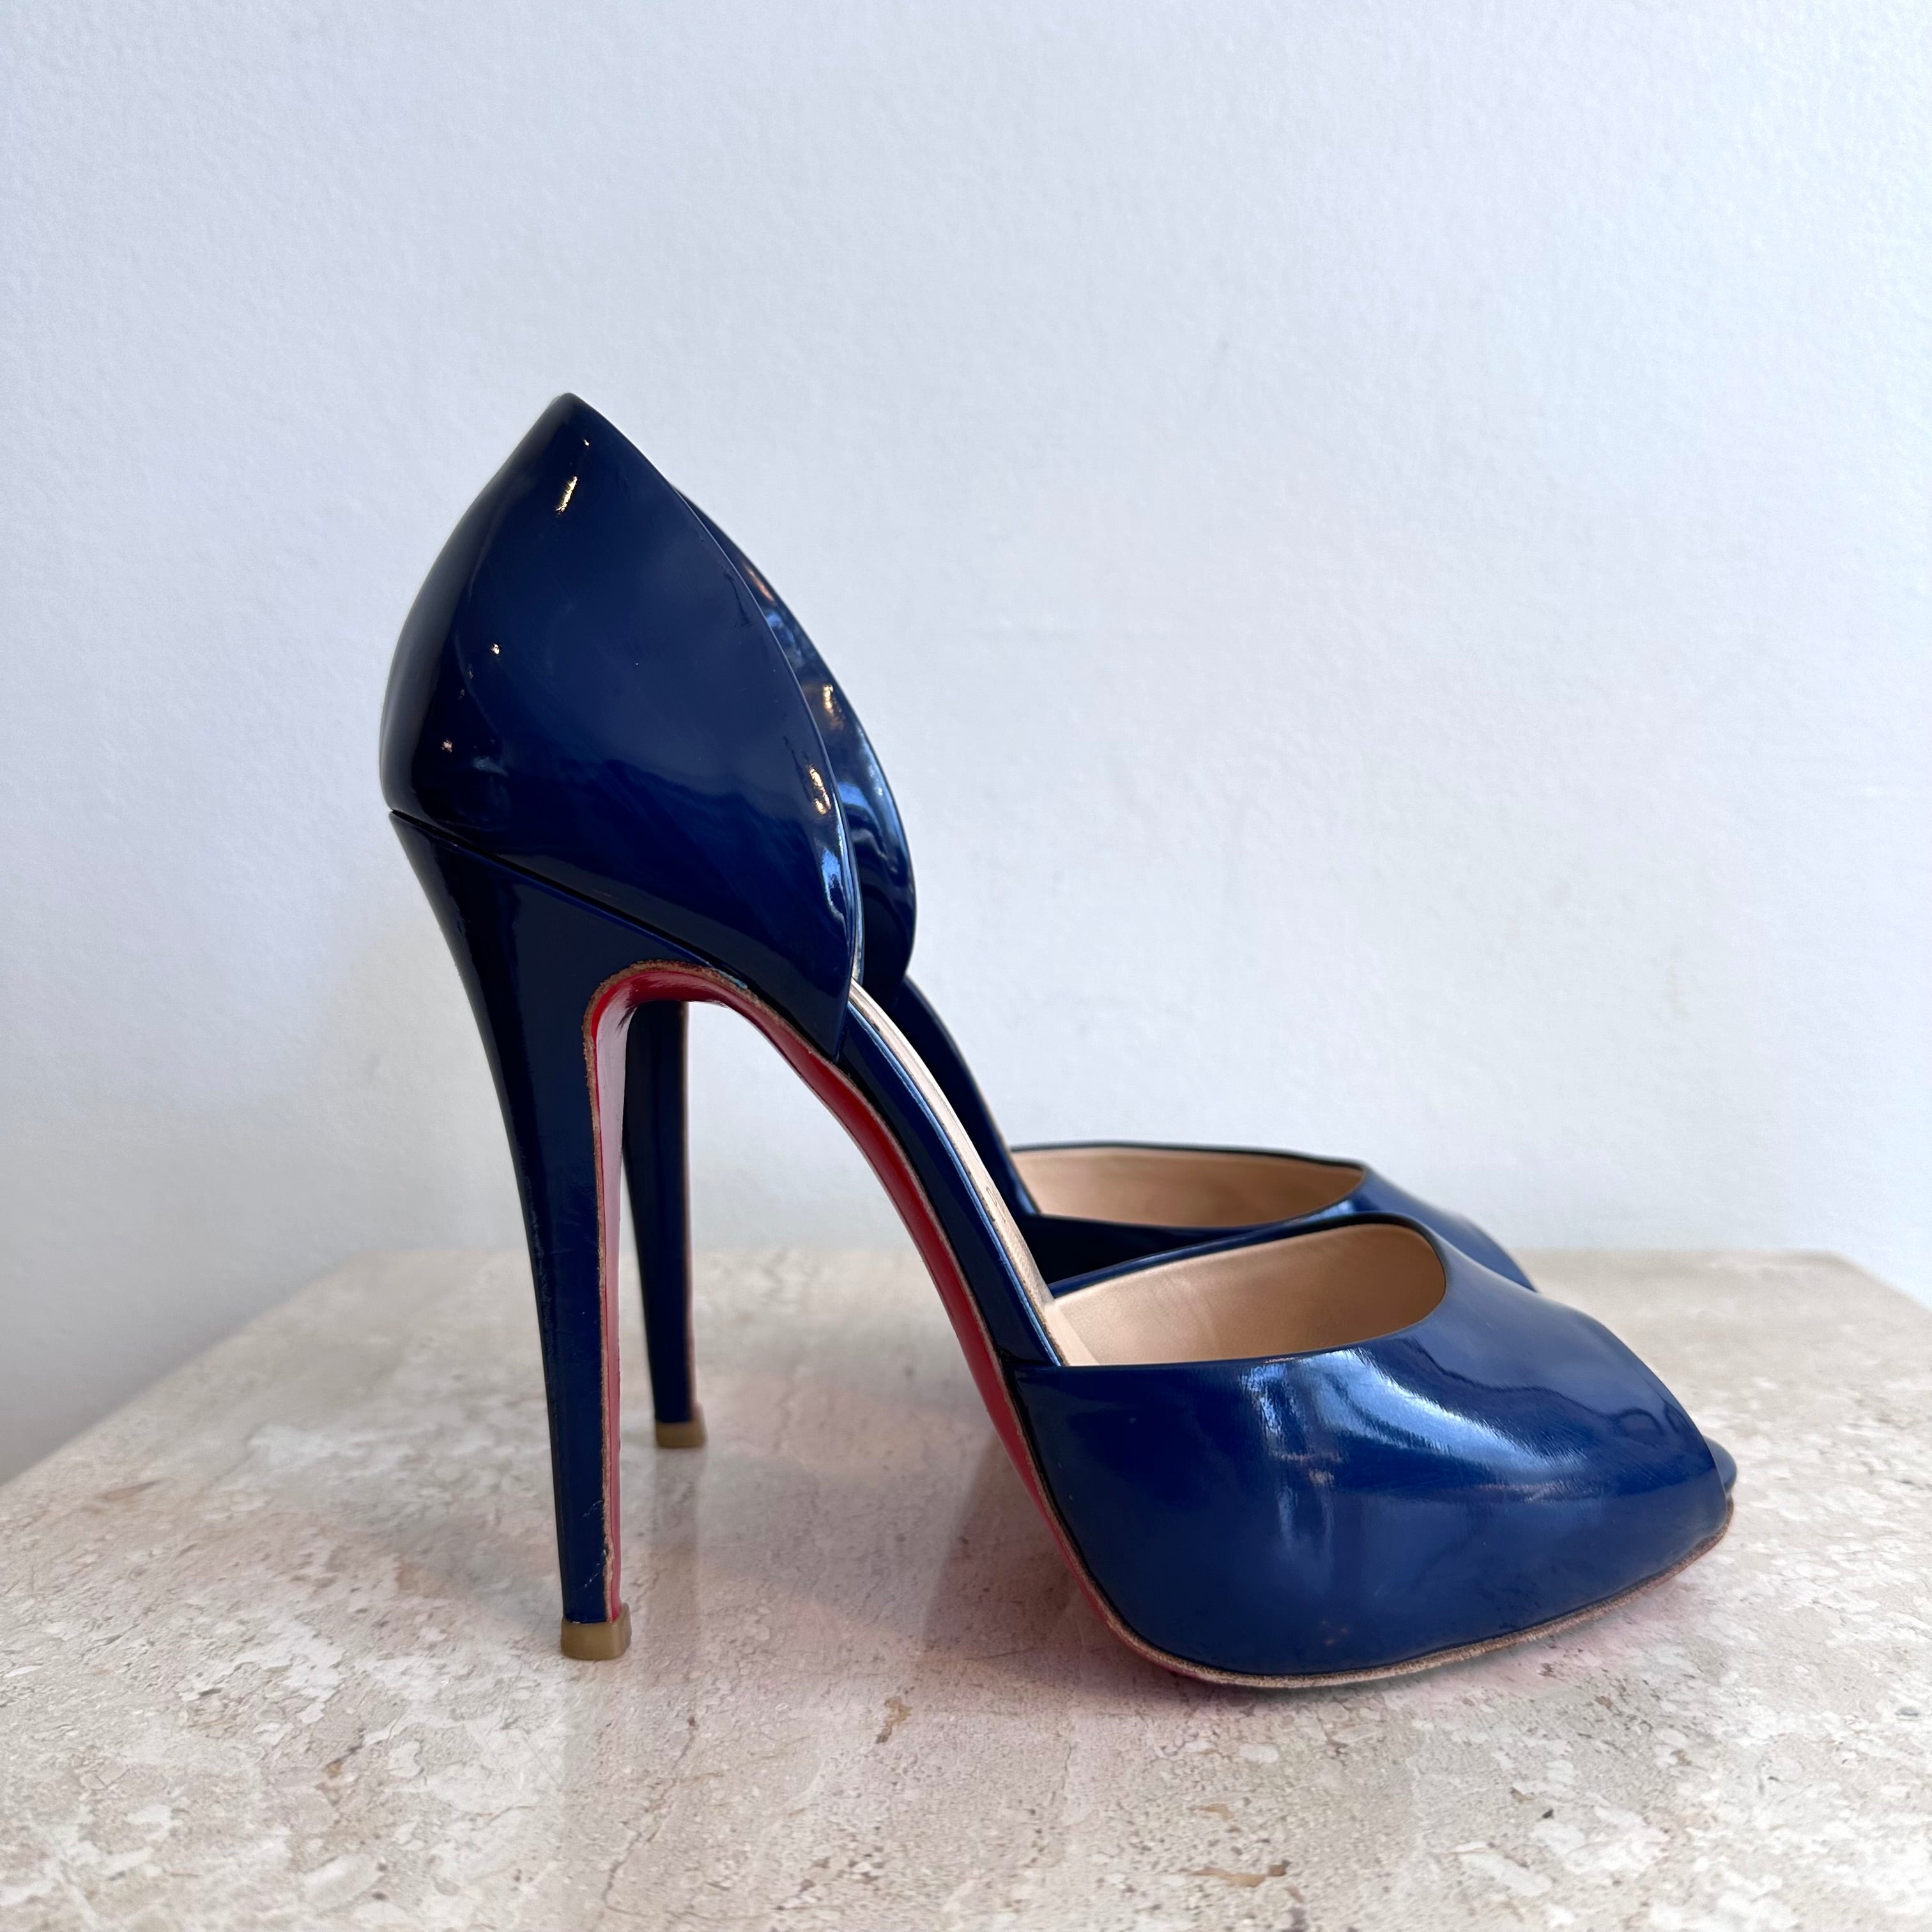 Pre-Owned CHRISTIAN LOUBOUTIN Patent Madame Claude 120 Peep Toe Pumps Size 37